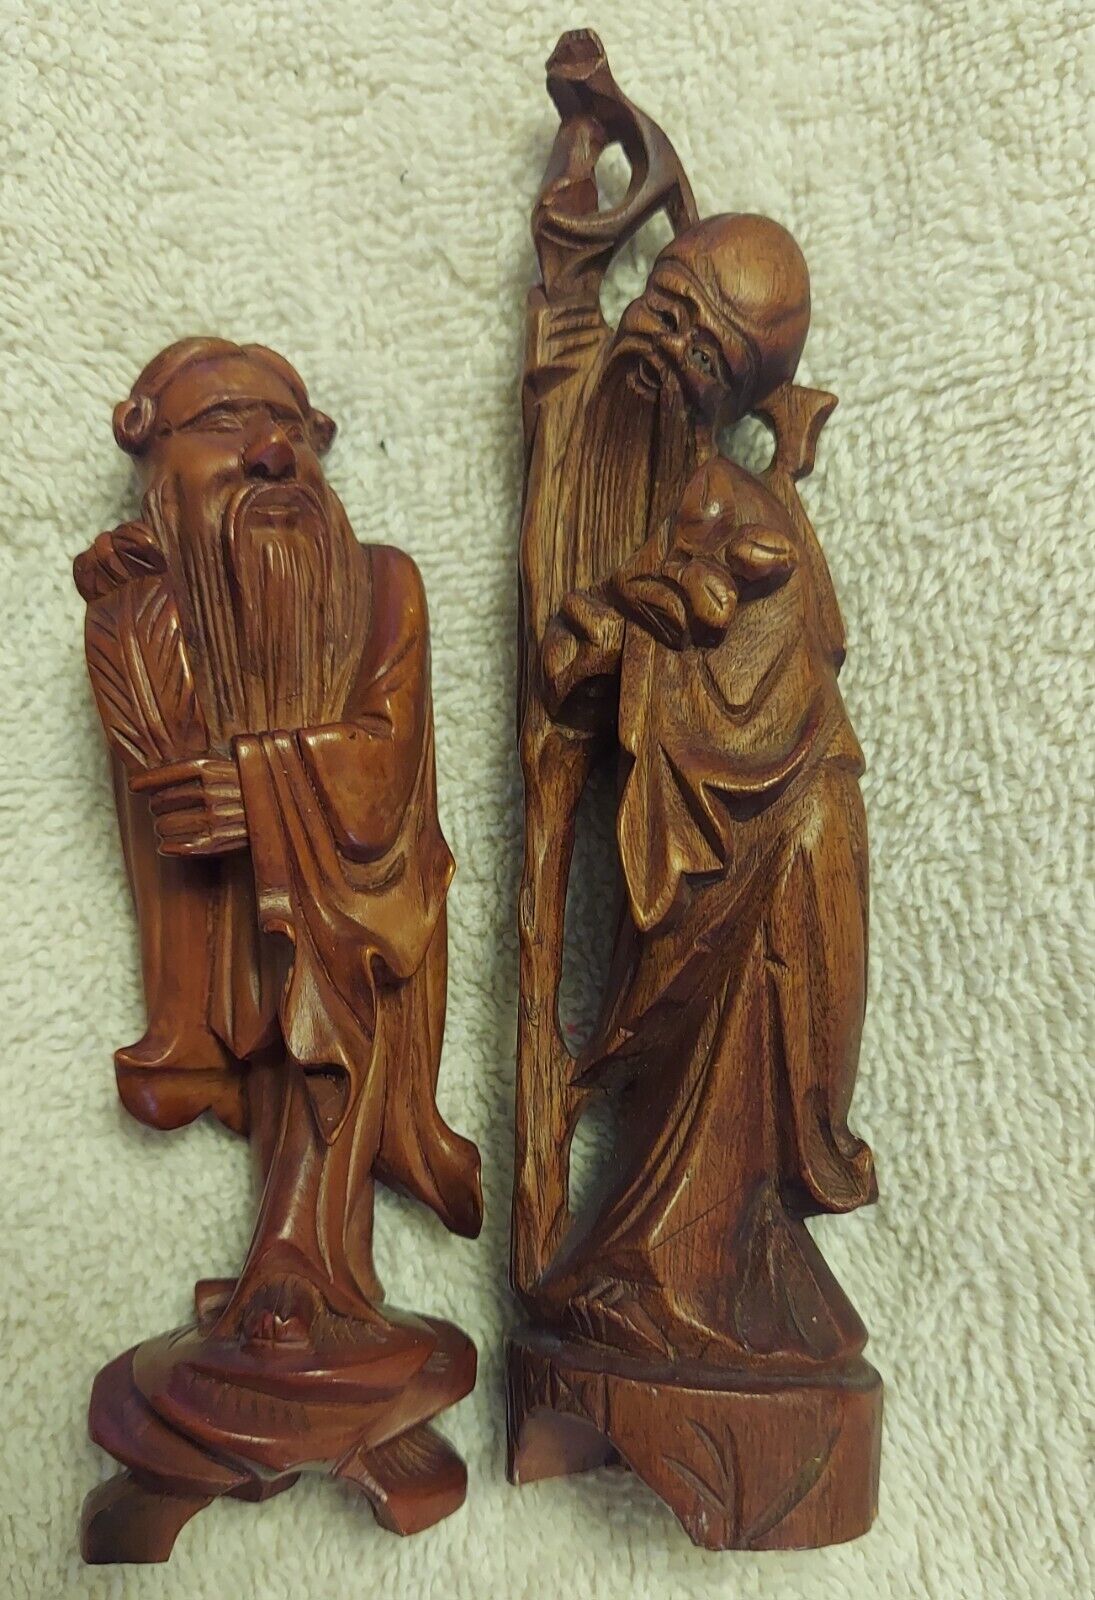 Pair Of Hand Carved Wood 6 Inch Chinese Figurine Sculptures